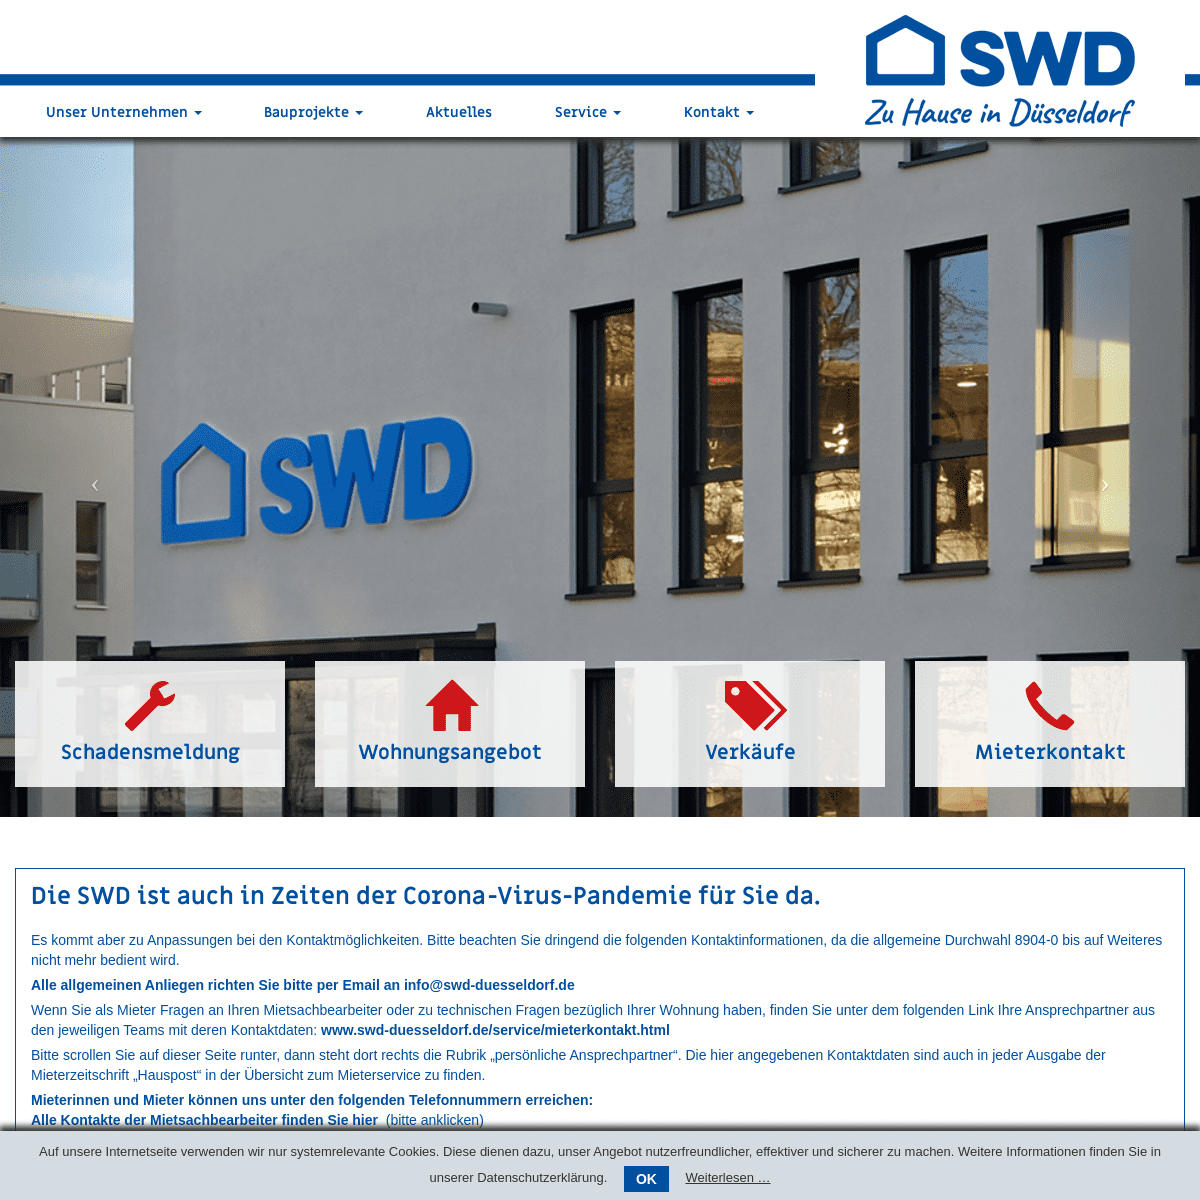 A complete backup of swd-duesseldorf.de